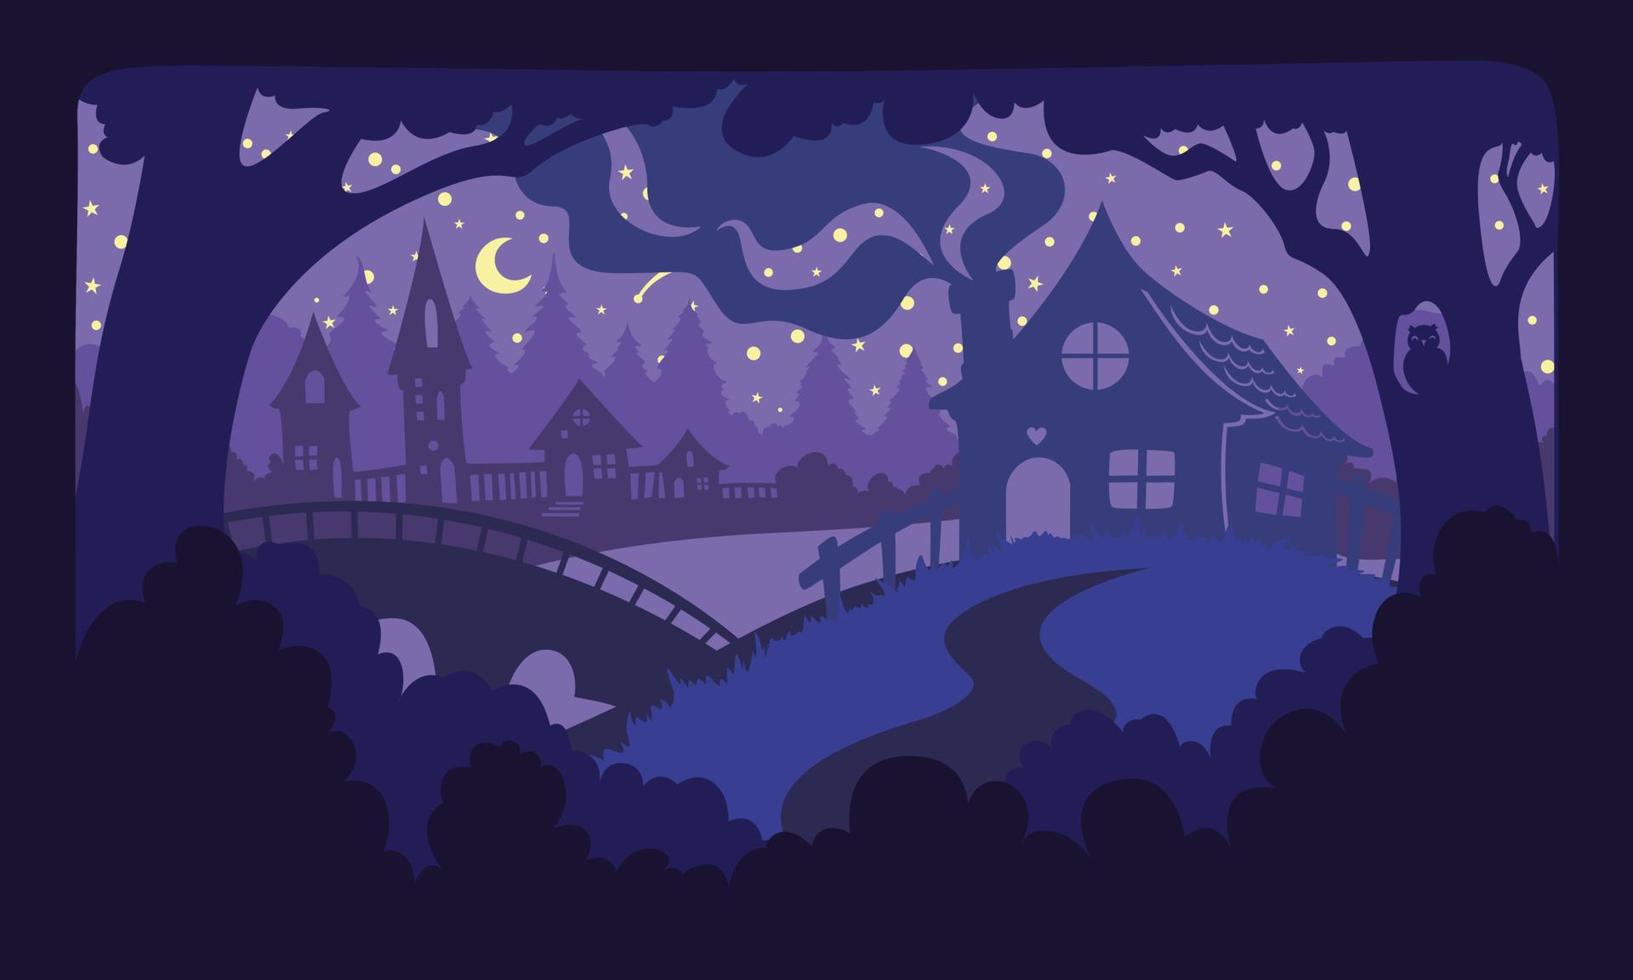 Night landscape with houses with smoke from a chimney, forests, trees, a bridge, an owl in a hollow. Cut paper technique for hand made. Purple and dark blue colors. vector